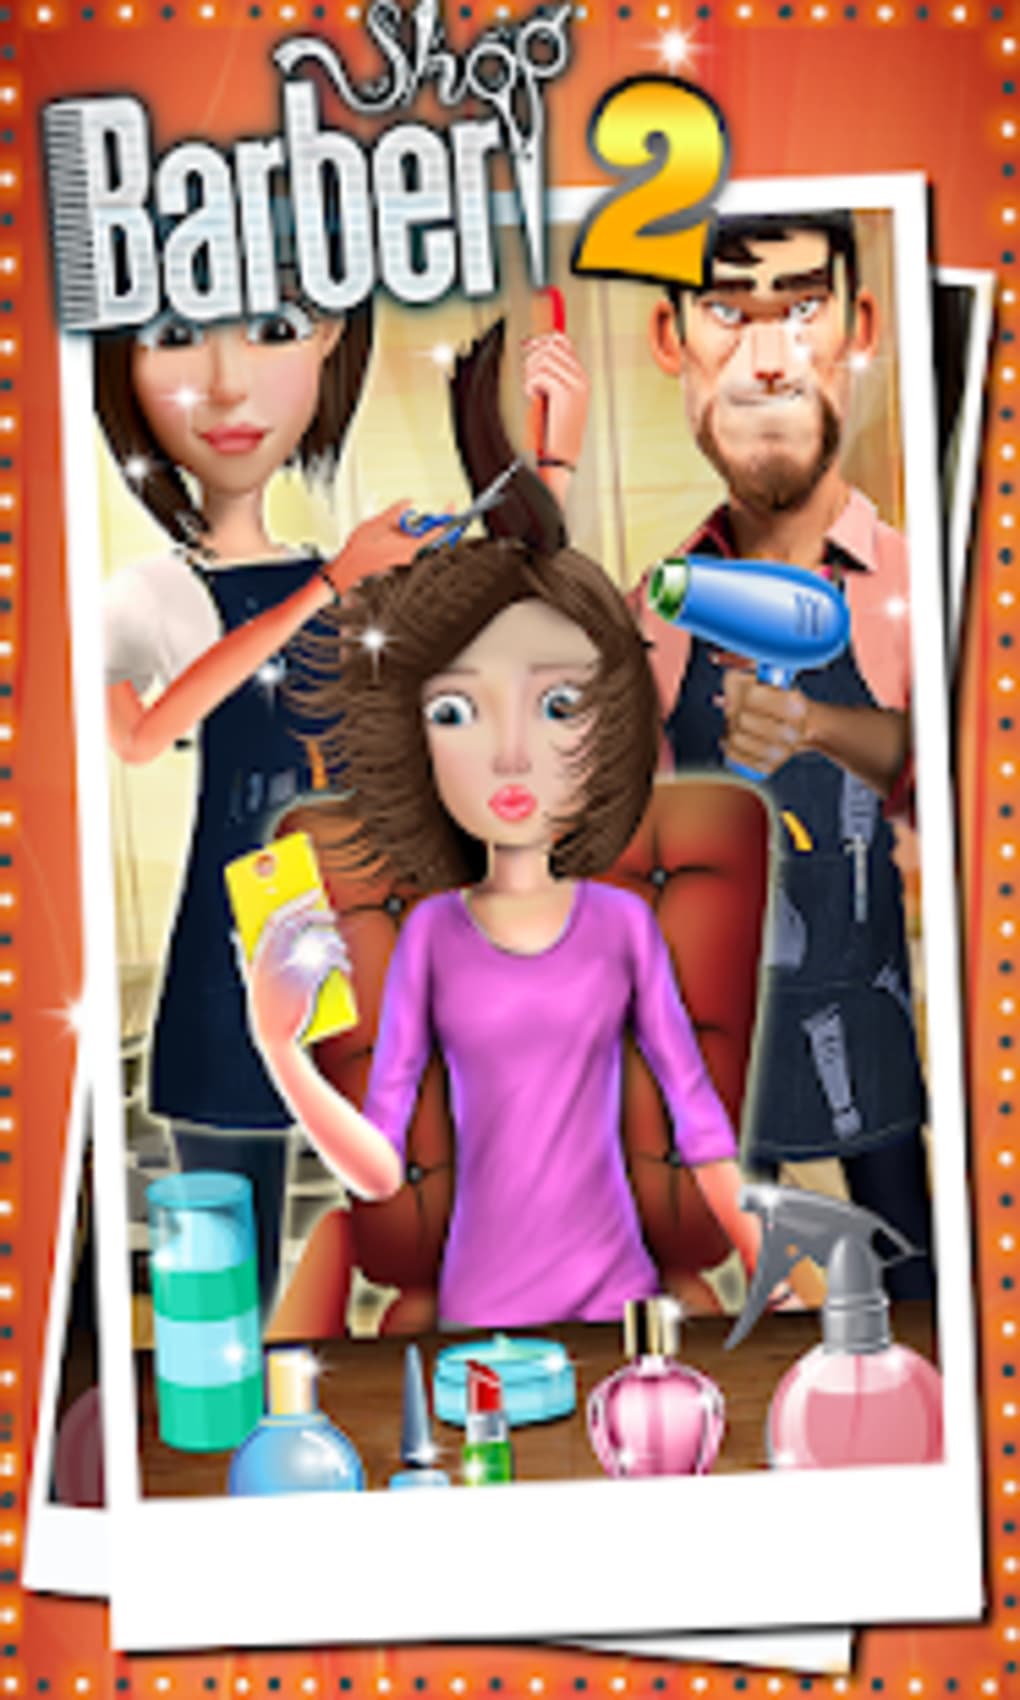 Barber Shop Hair Salon - Beard Styles Hair Cutting Game  Free::Appstore for Android